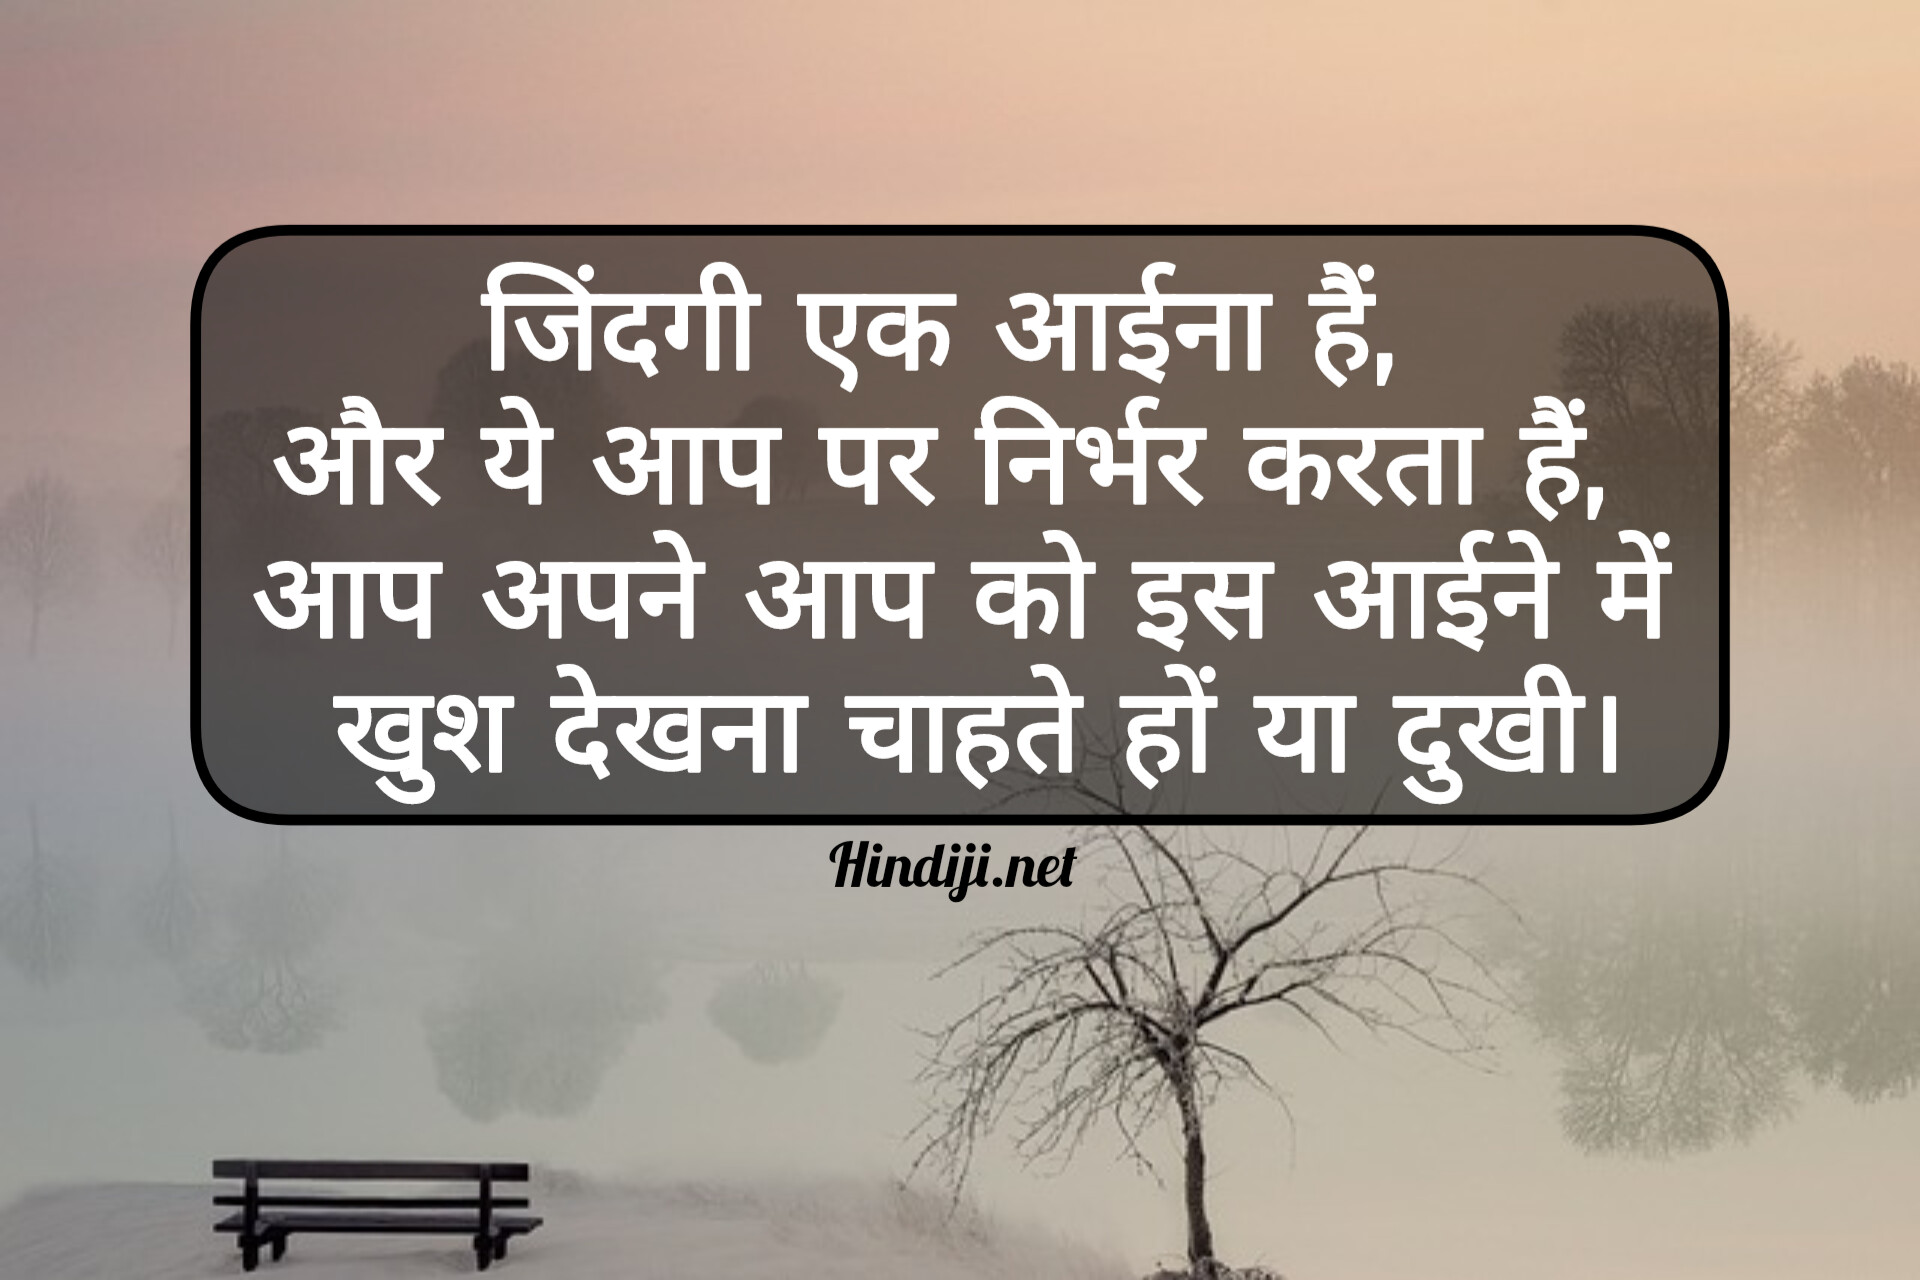 Thought in hindi